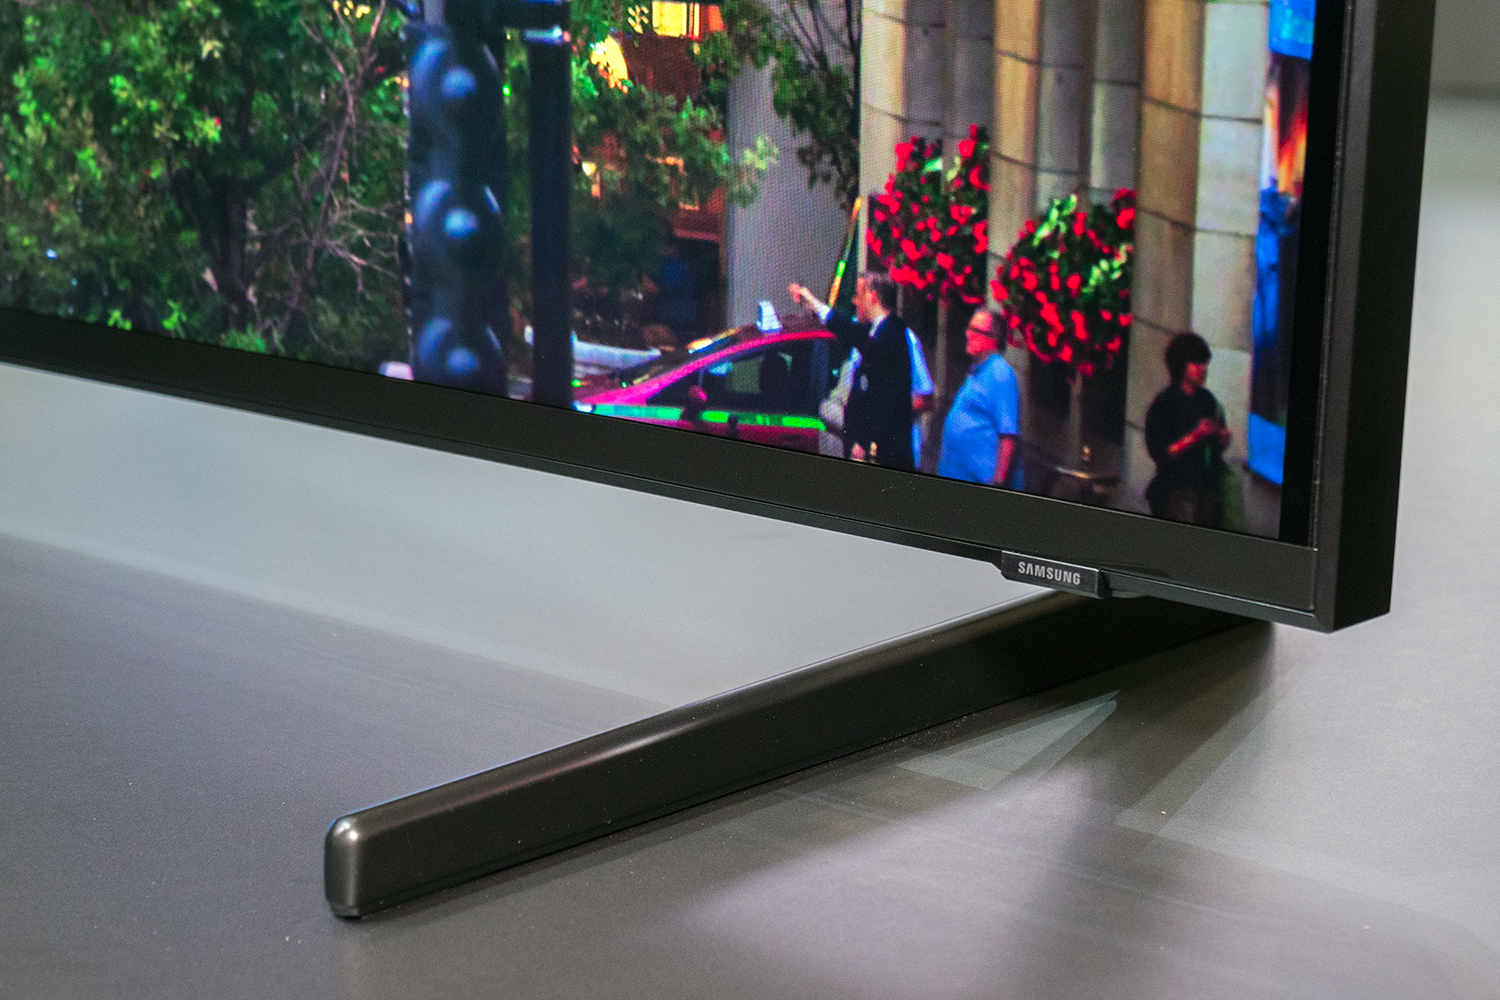 Samsung Q900 8K TV hands-on: A gorgeous 85-inch image at any resolution -  CNET